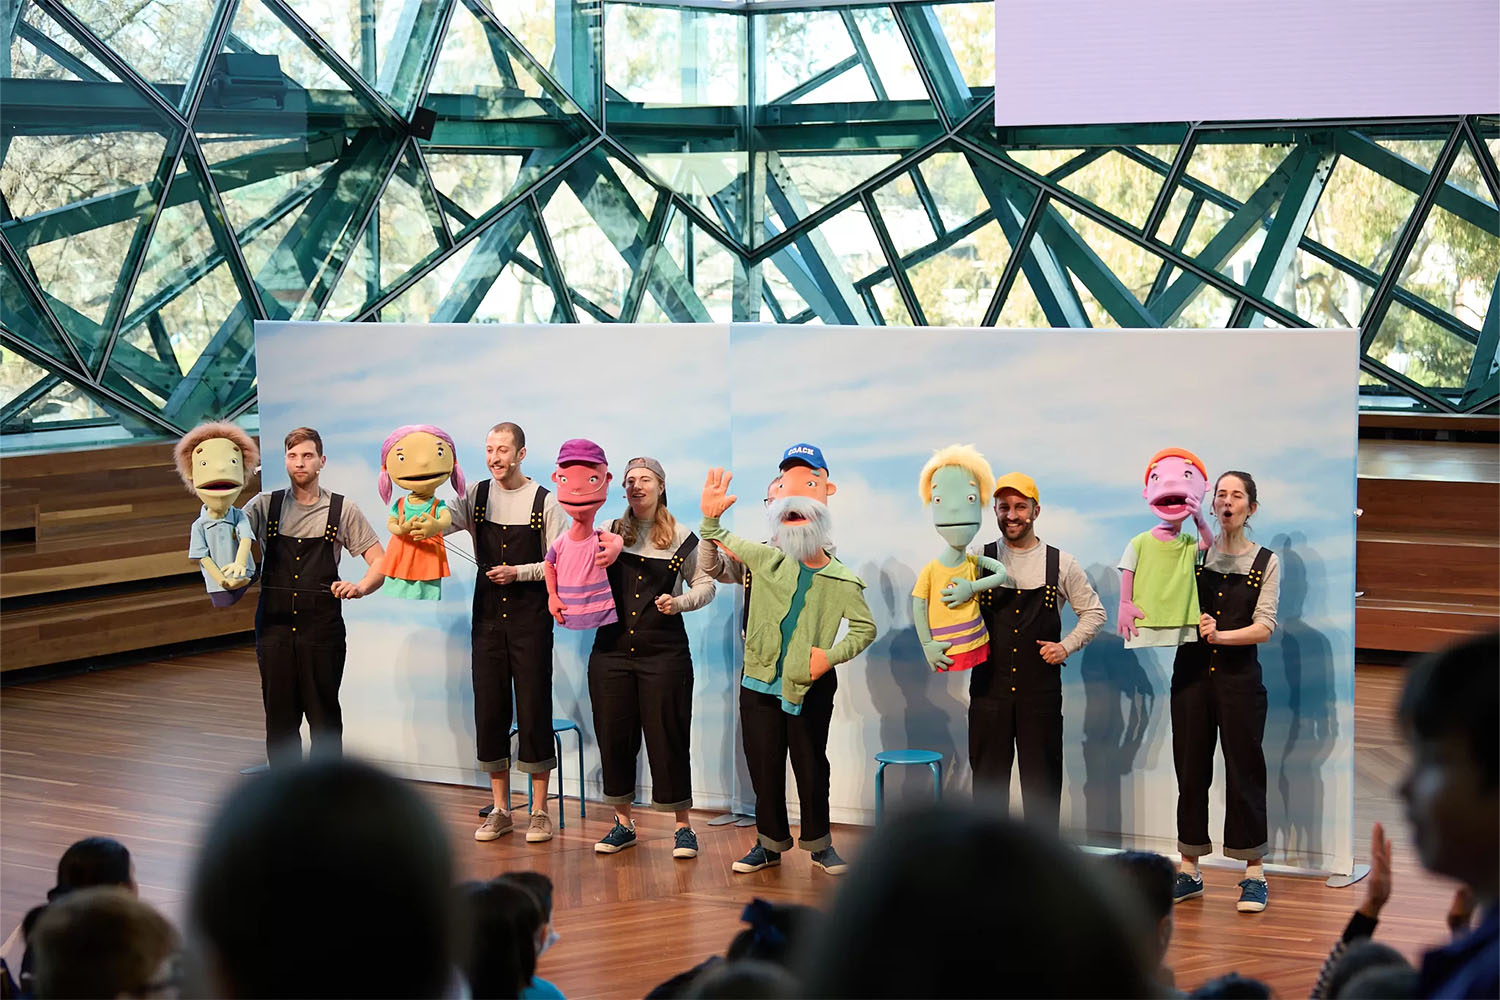 New Camp Quality puppets being unveiled on stage in front of school groups at Federation Square